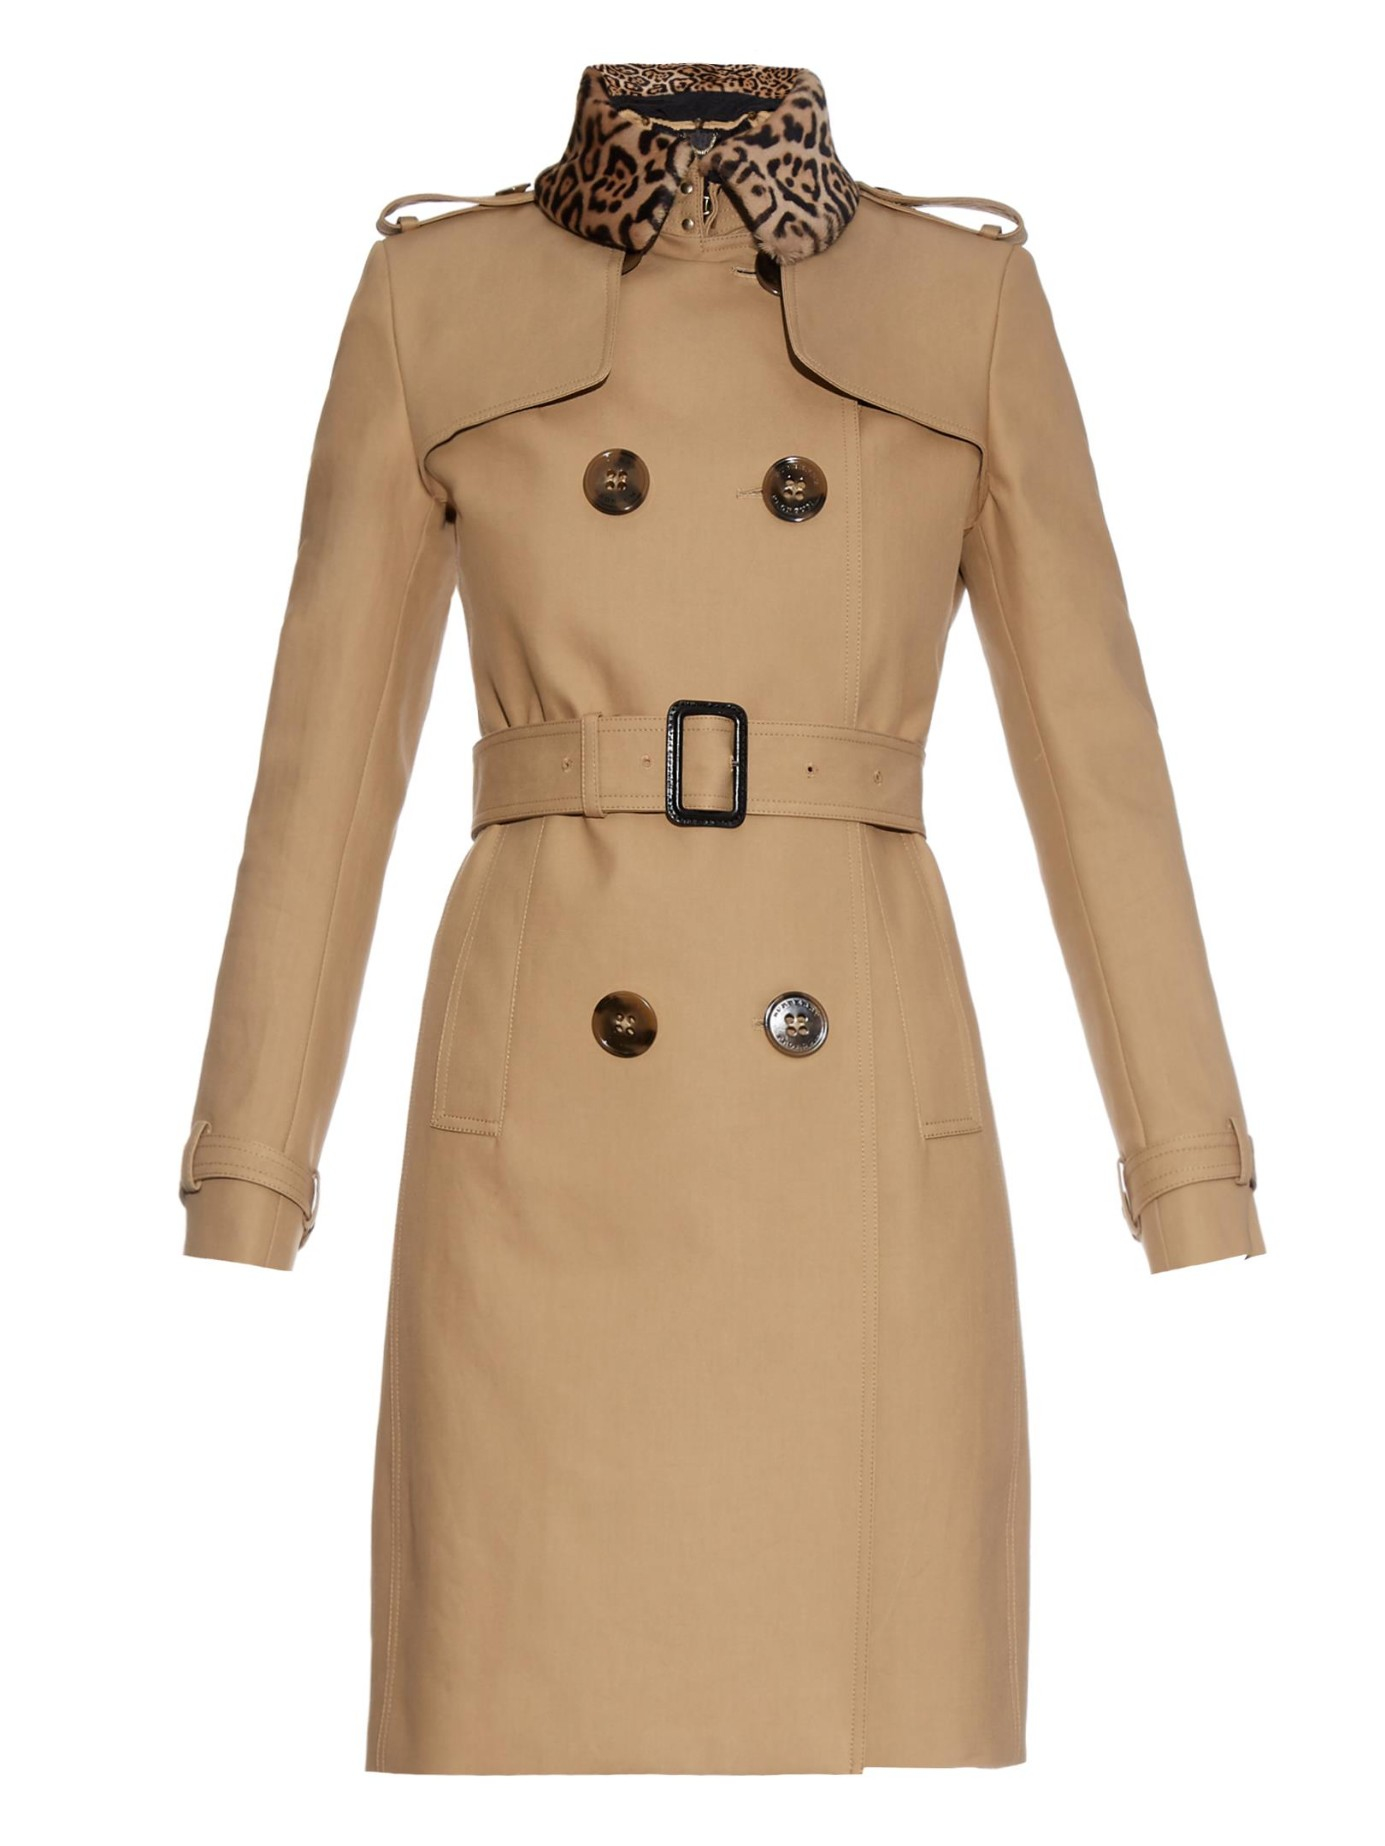 Burberry Prorsum Leopard-Print Collar Trench Coat in Brown | Lyst